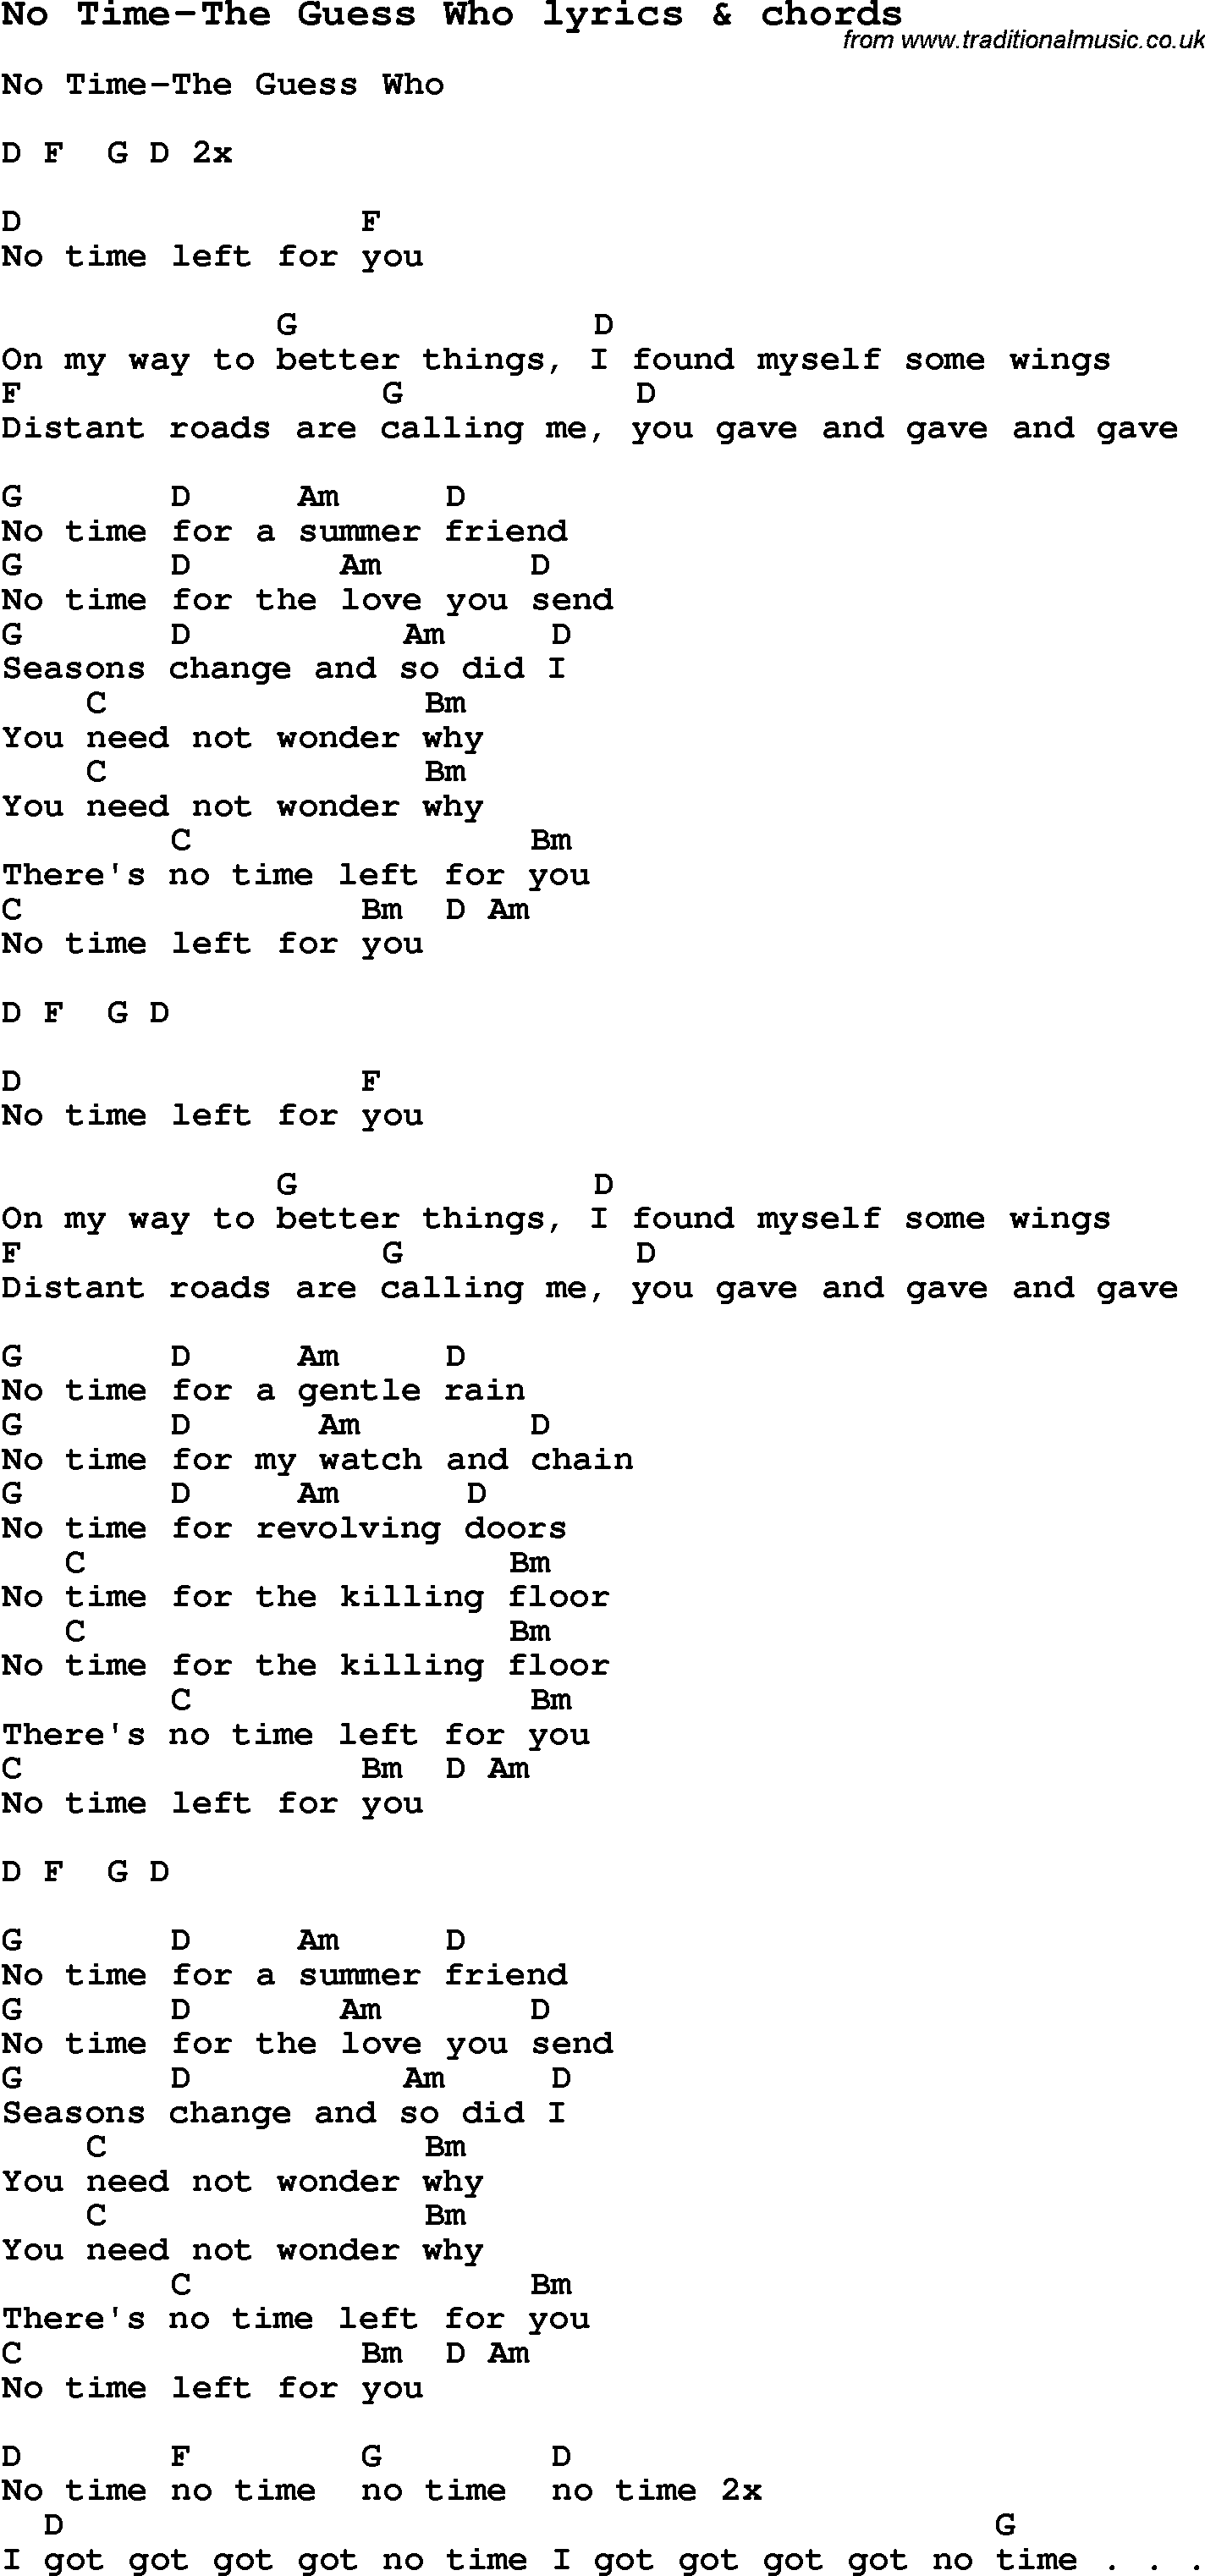 Love Song Lyrics for: No Time-The Guess Who with chords for Ukulele, Guitar Banjo etc.